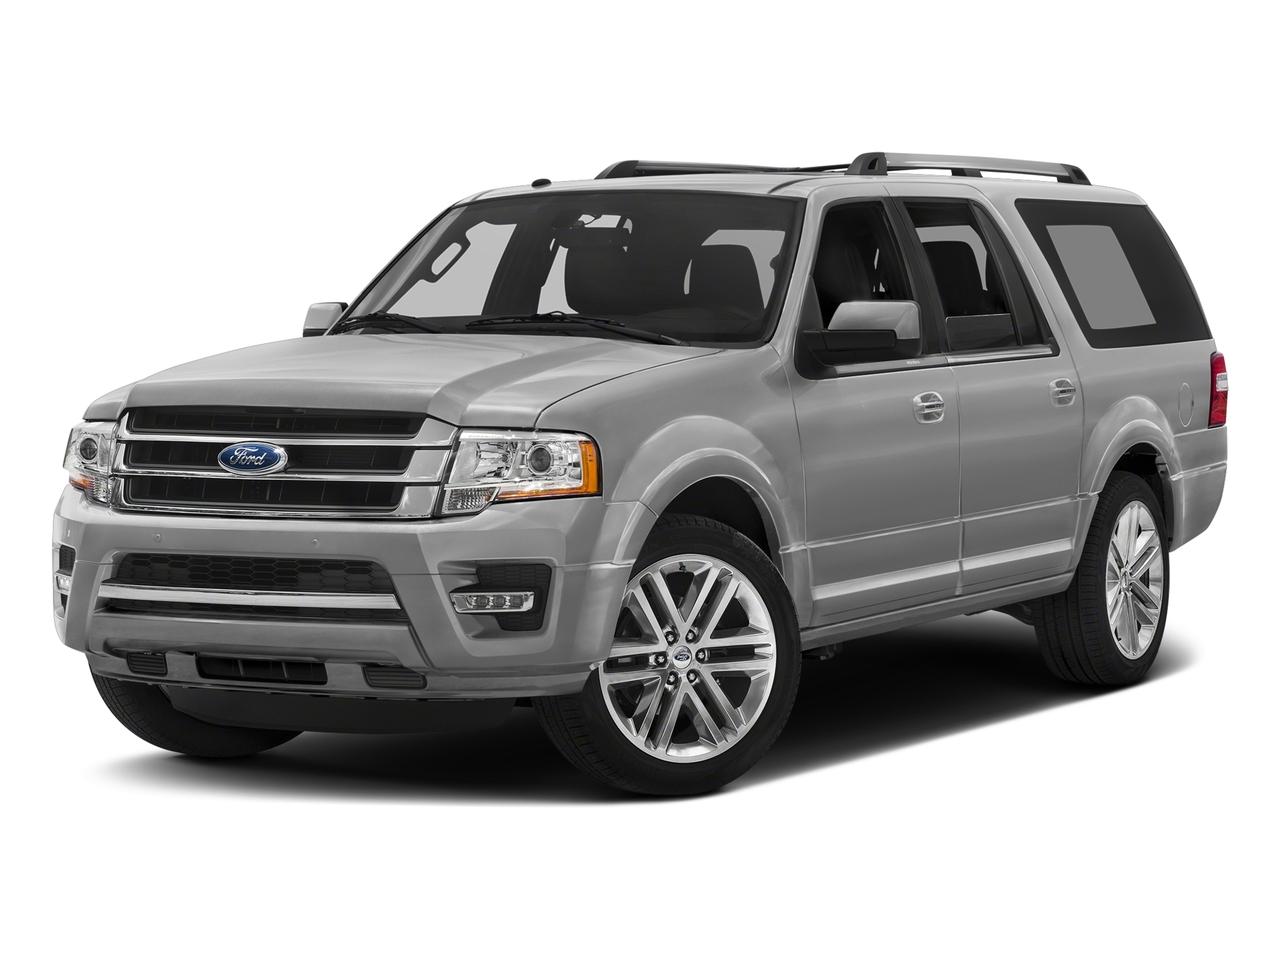 Used 2017 Ford Expedition EL Limited 4x4 in Silver for sale in